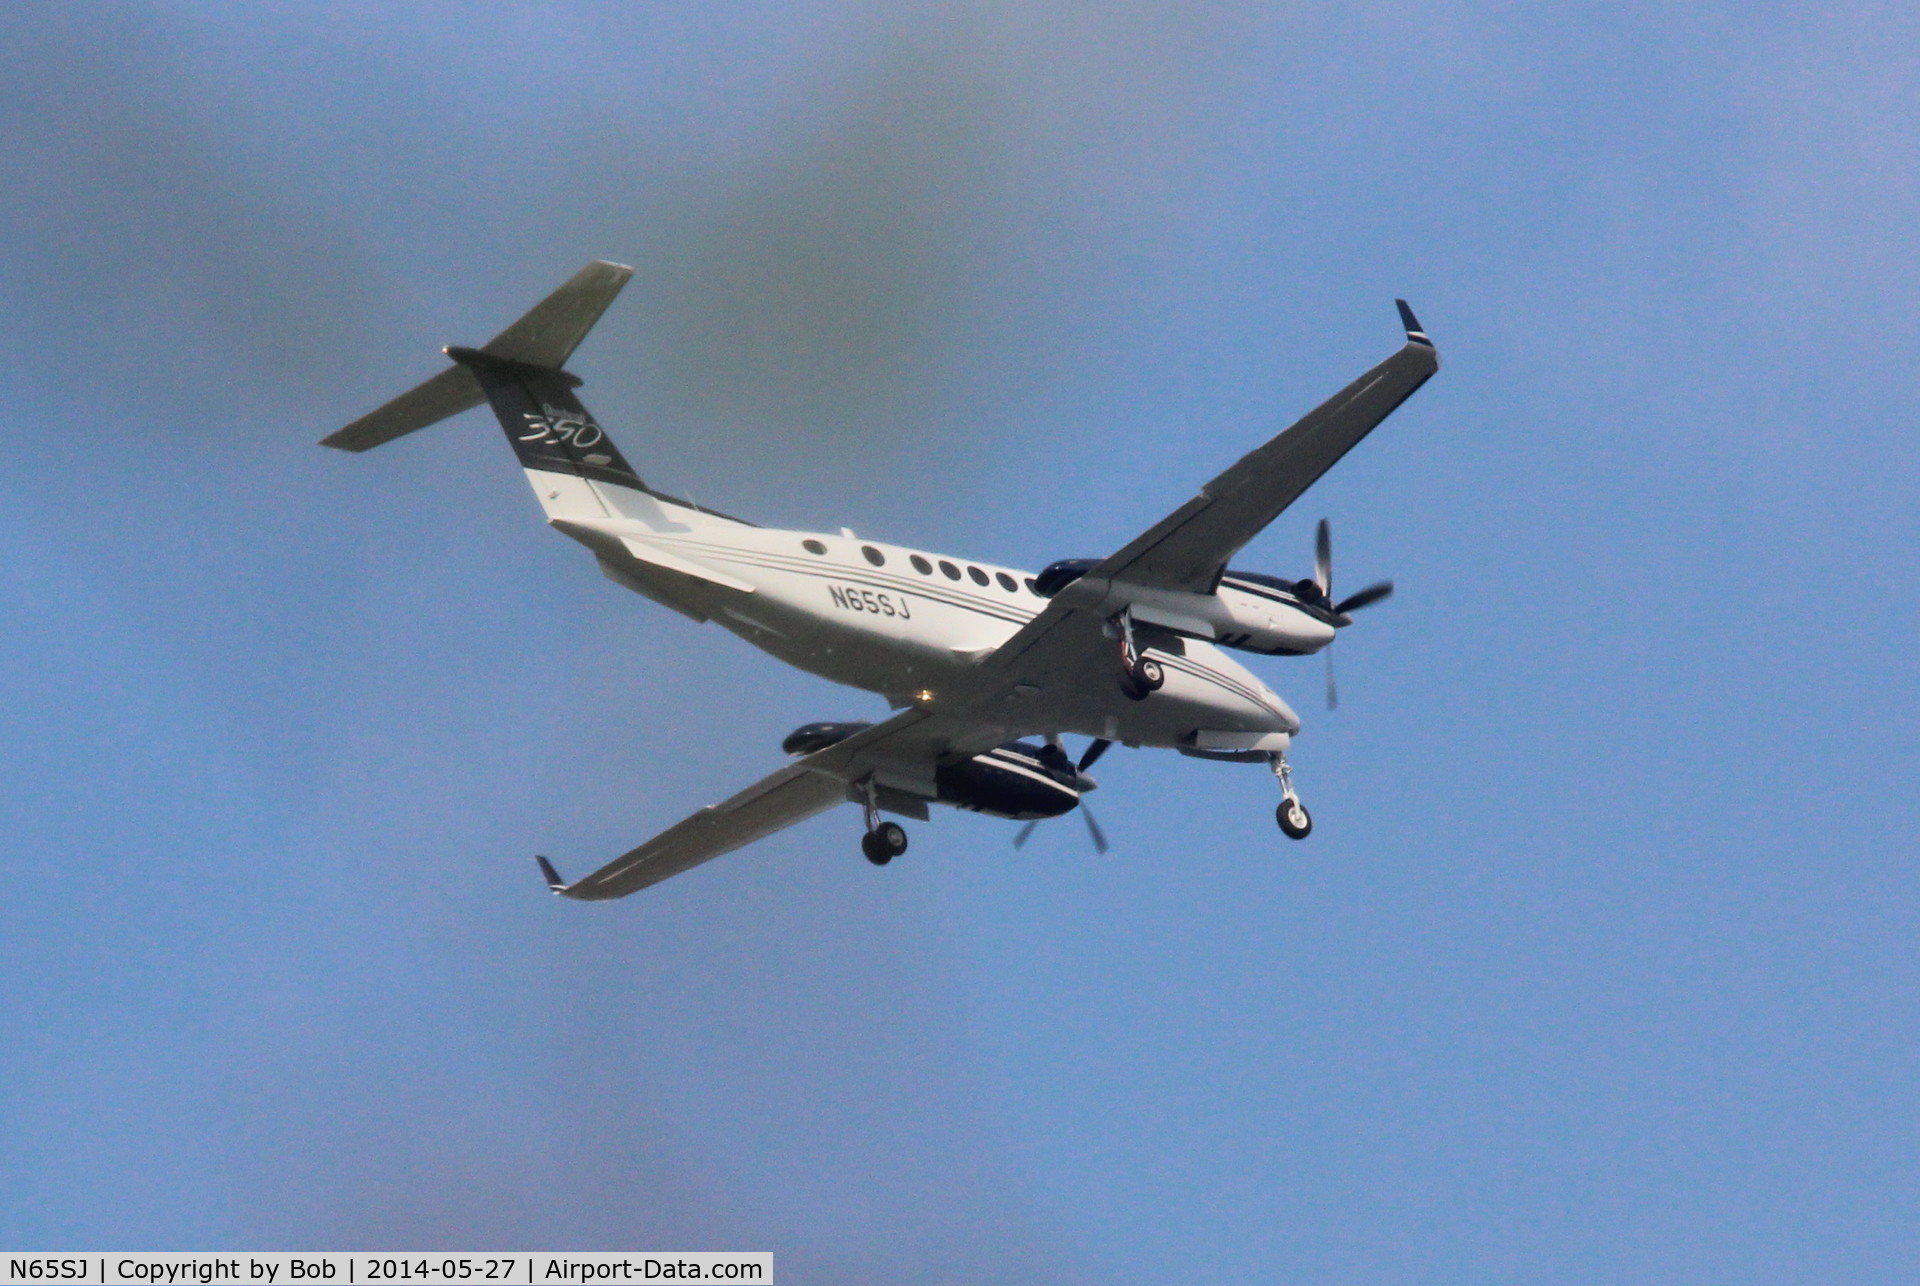 N65SJ, Hawker Beechcraft 350 King Air (B300) C/N FL-636, Downwind approach to Buttonville airport 27 May 2014